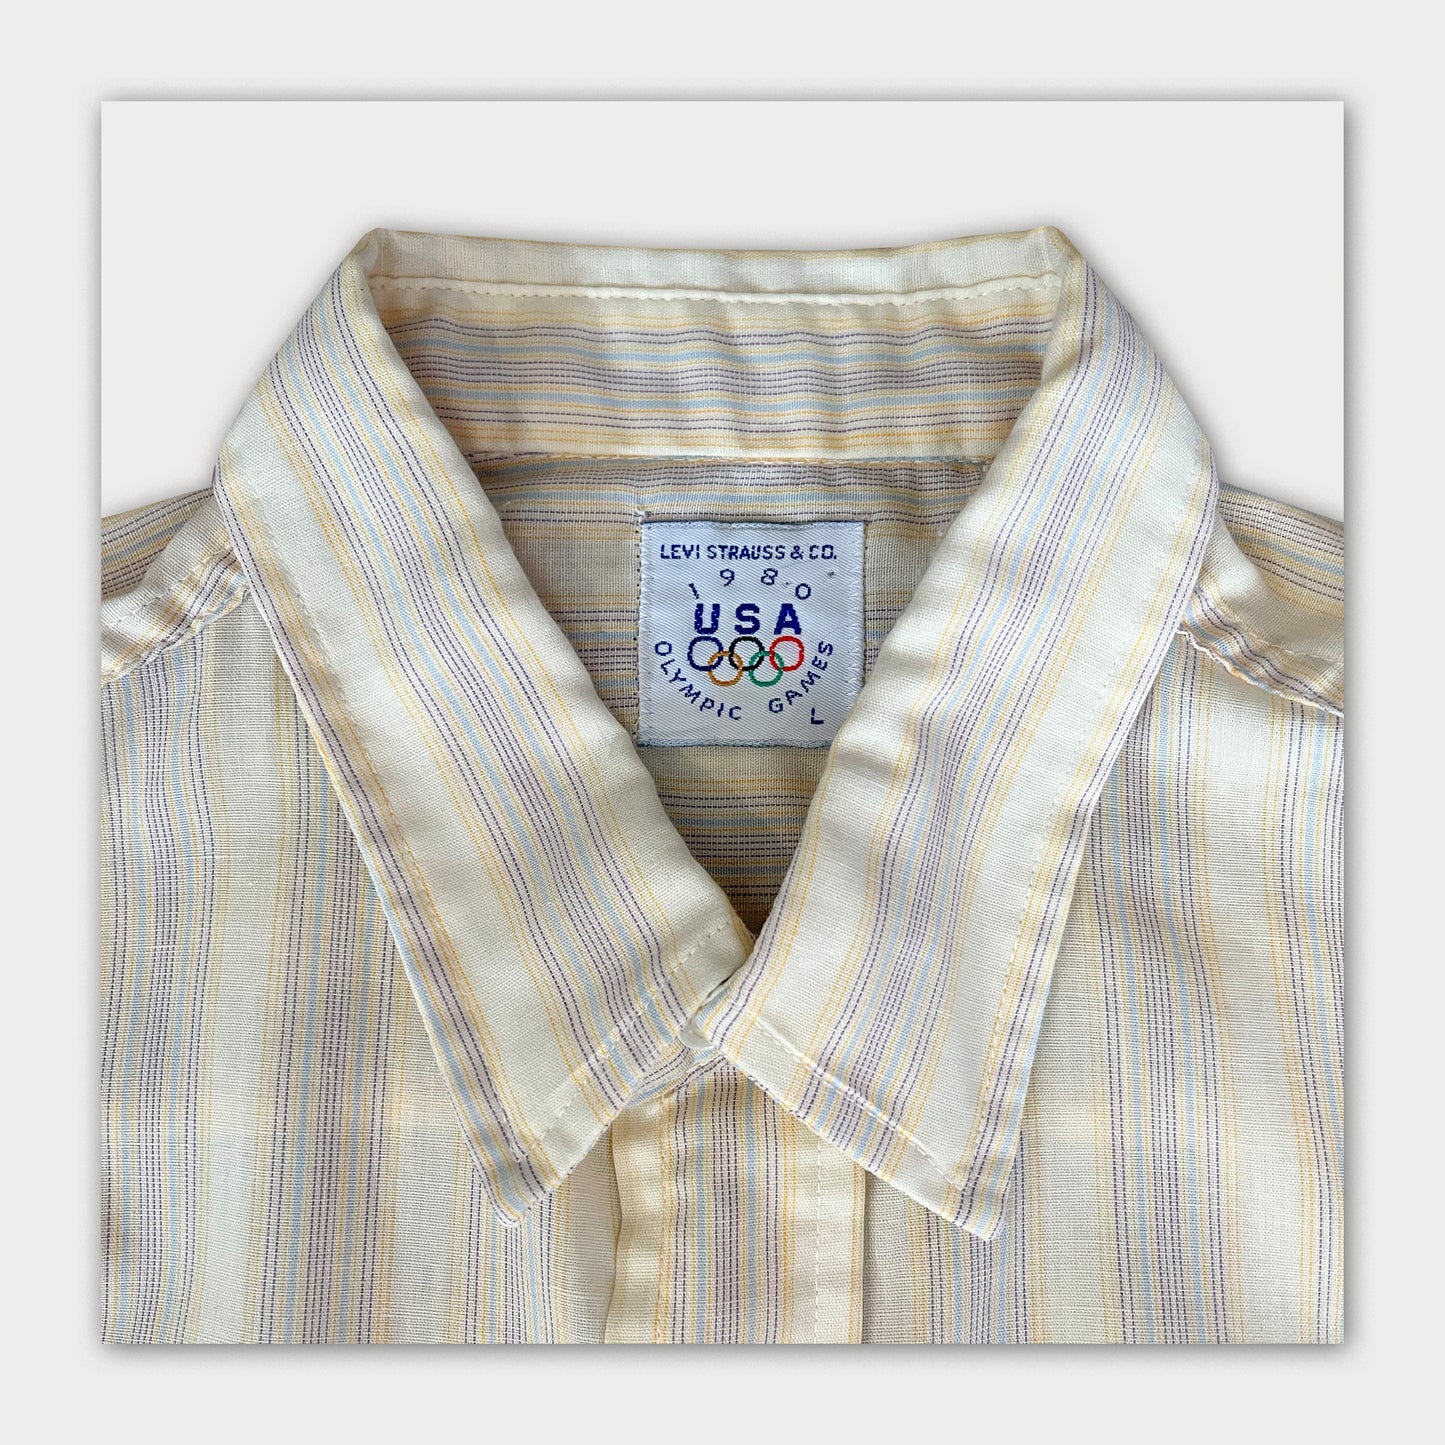 Vintage 1980's Olympic Games Levi's Shirt (RARE)